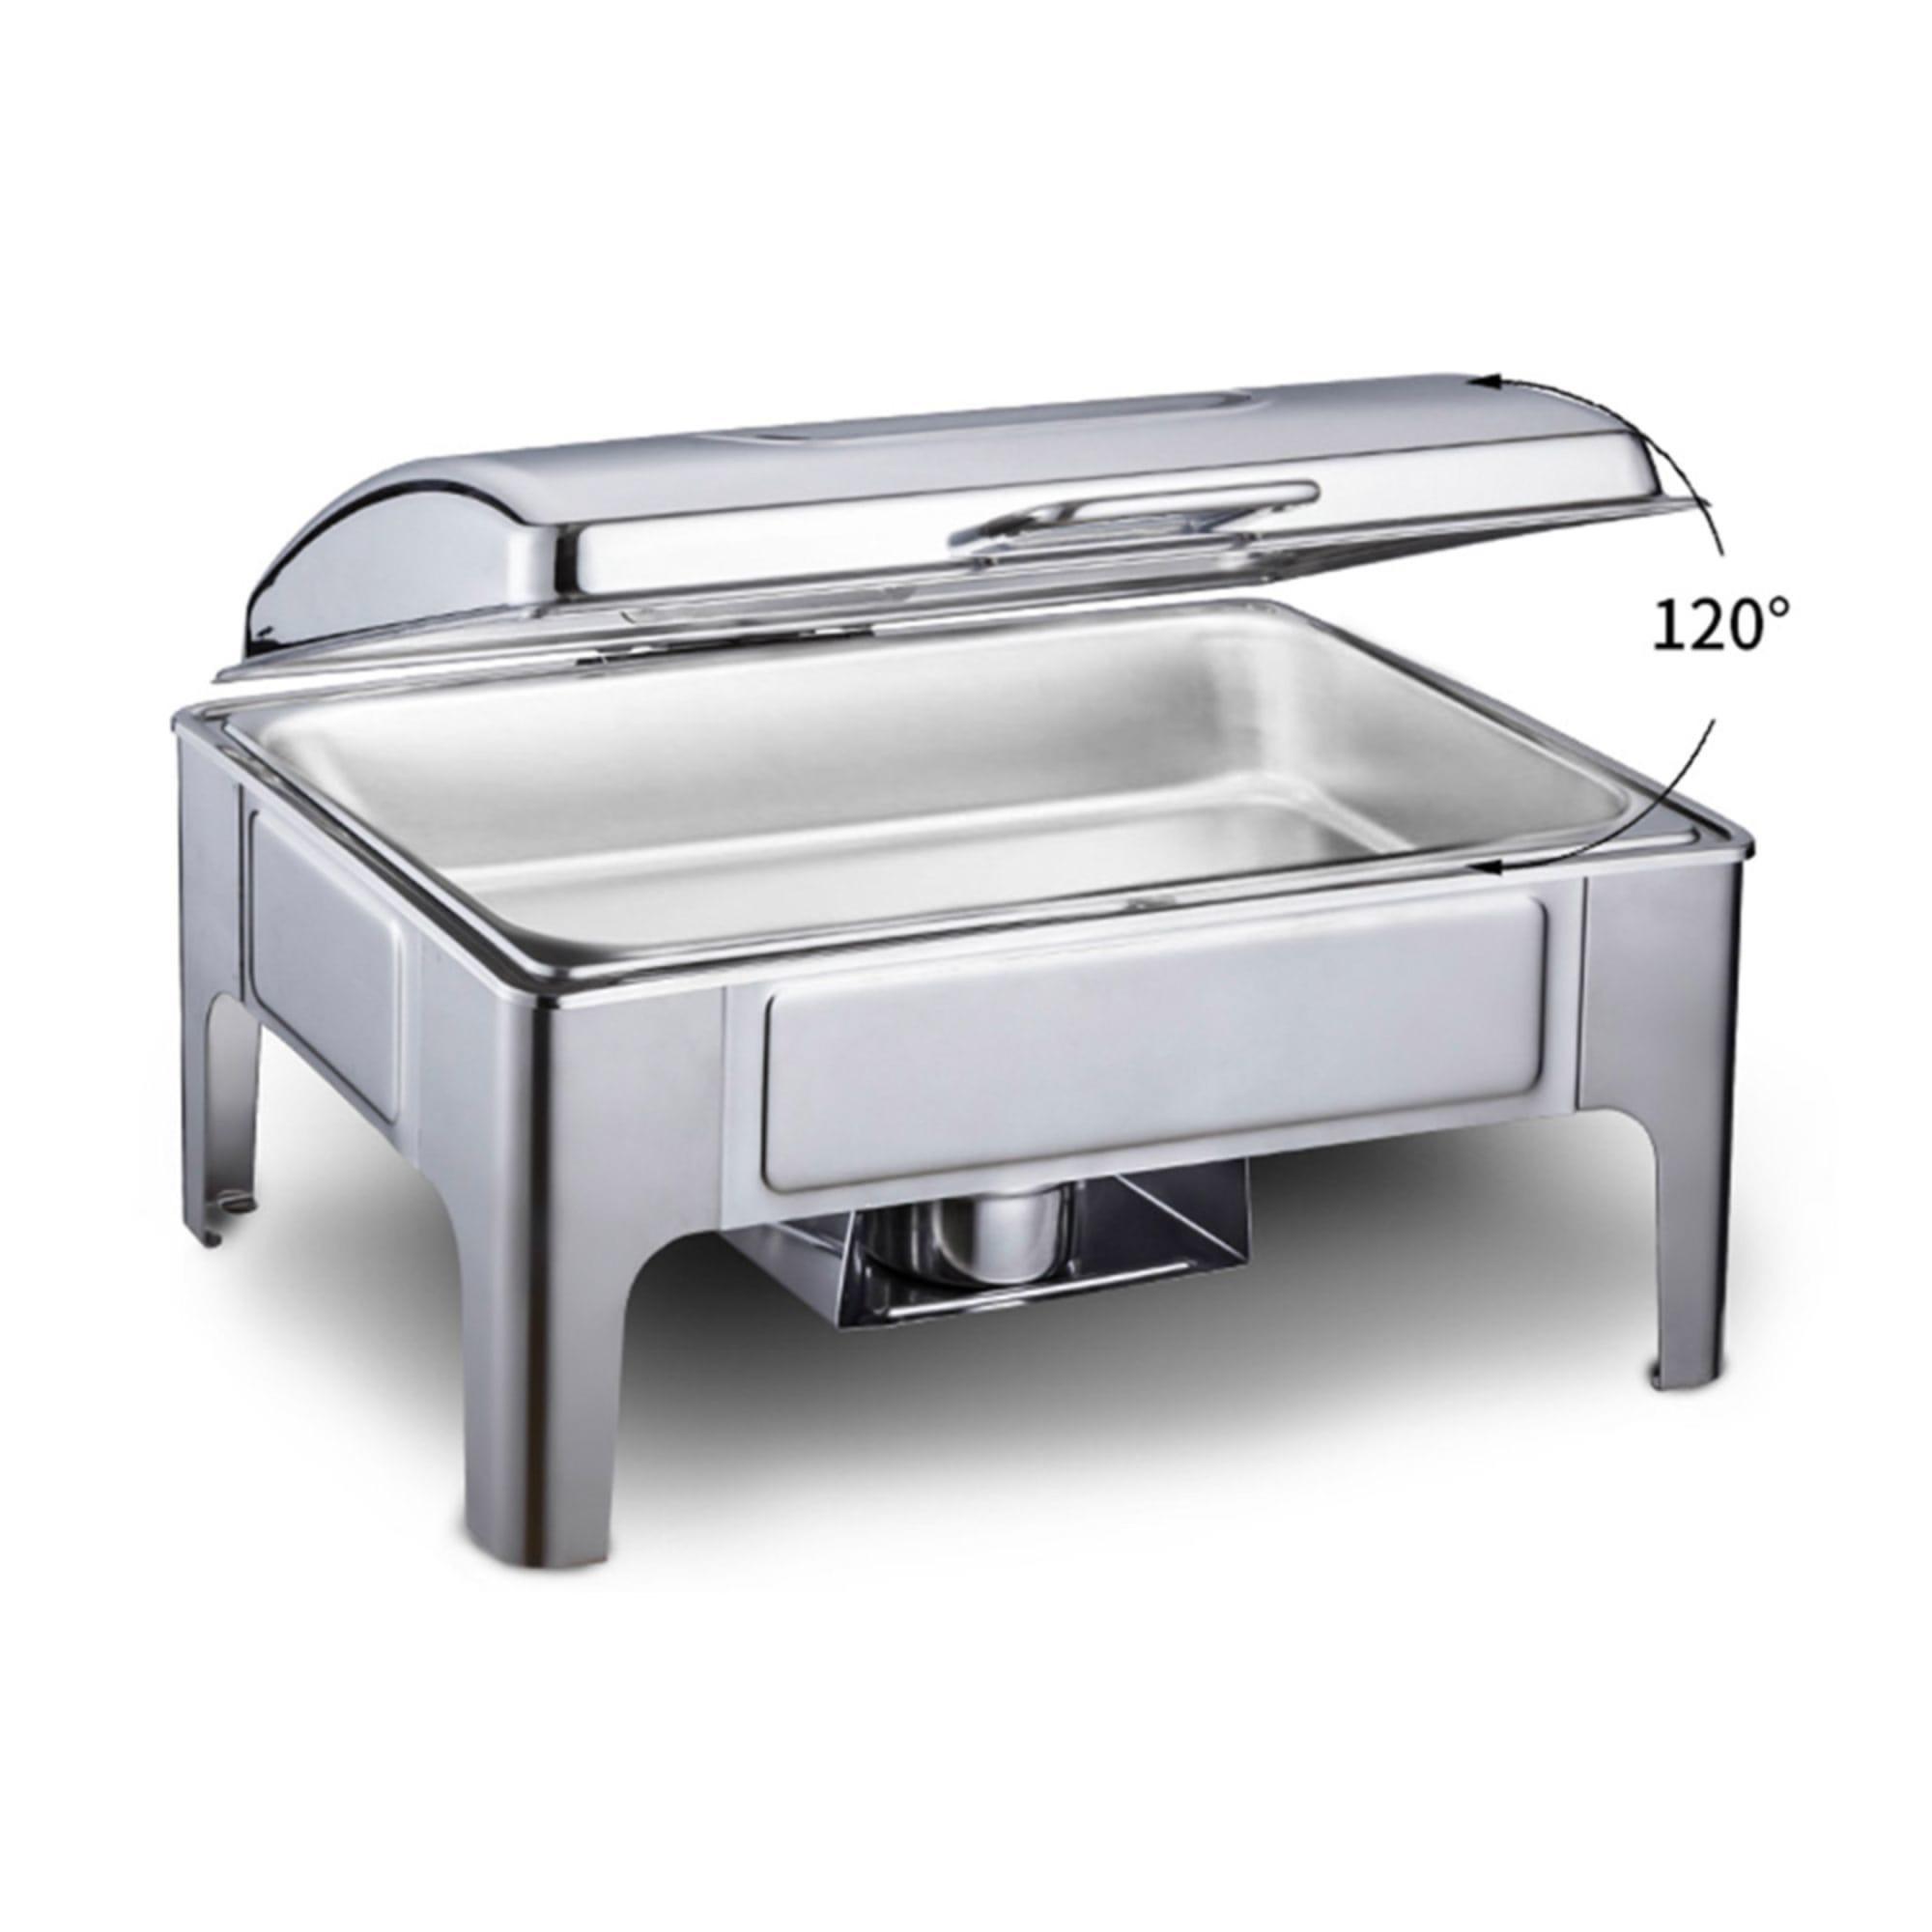 Soga Rectangular Stainless Steel Chafing Dish with Window Lid Image 5